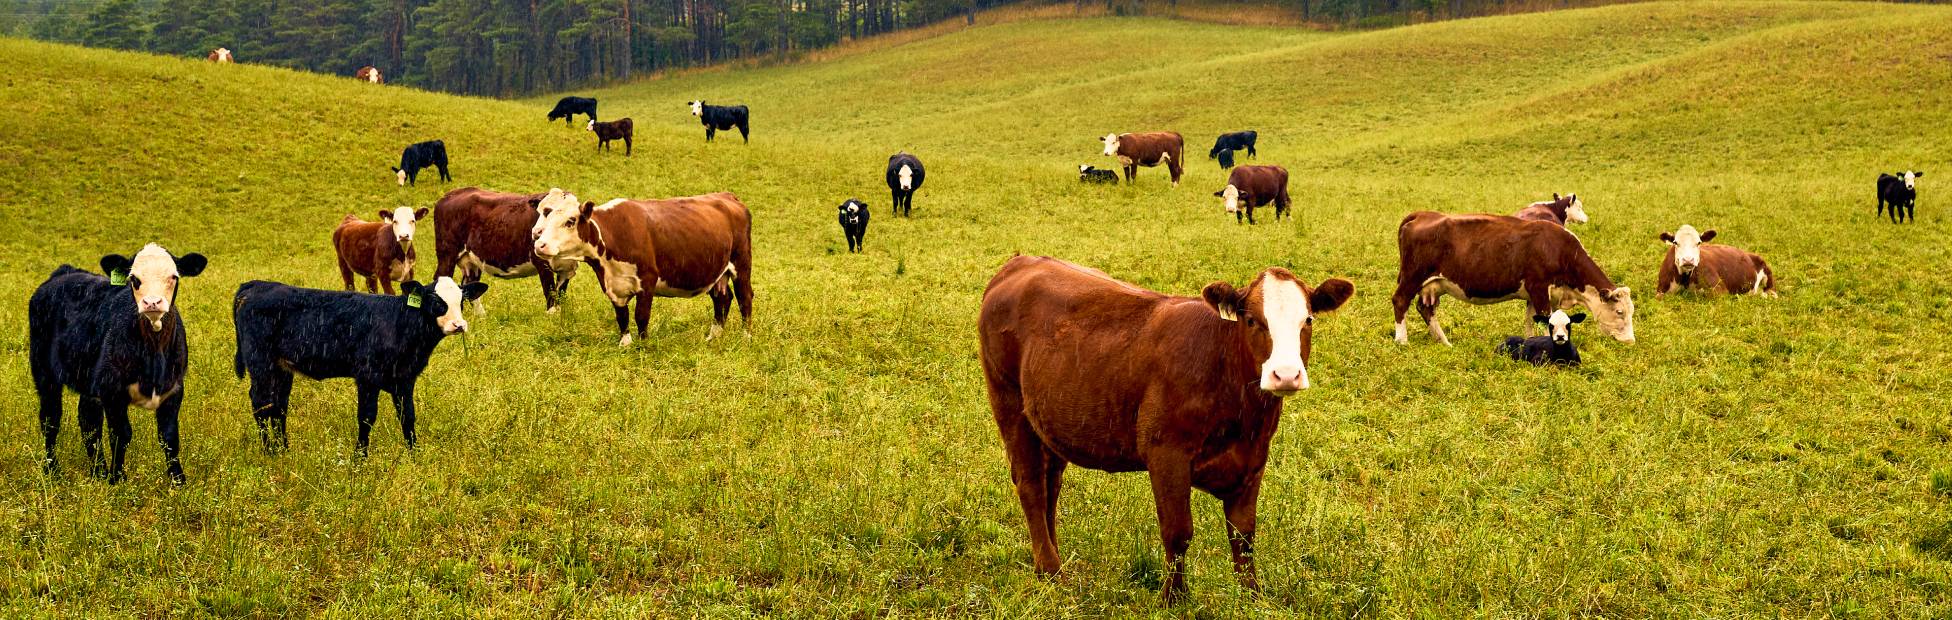 A grassy field in Durham, ON, with several brown and black cows